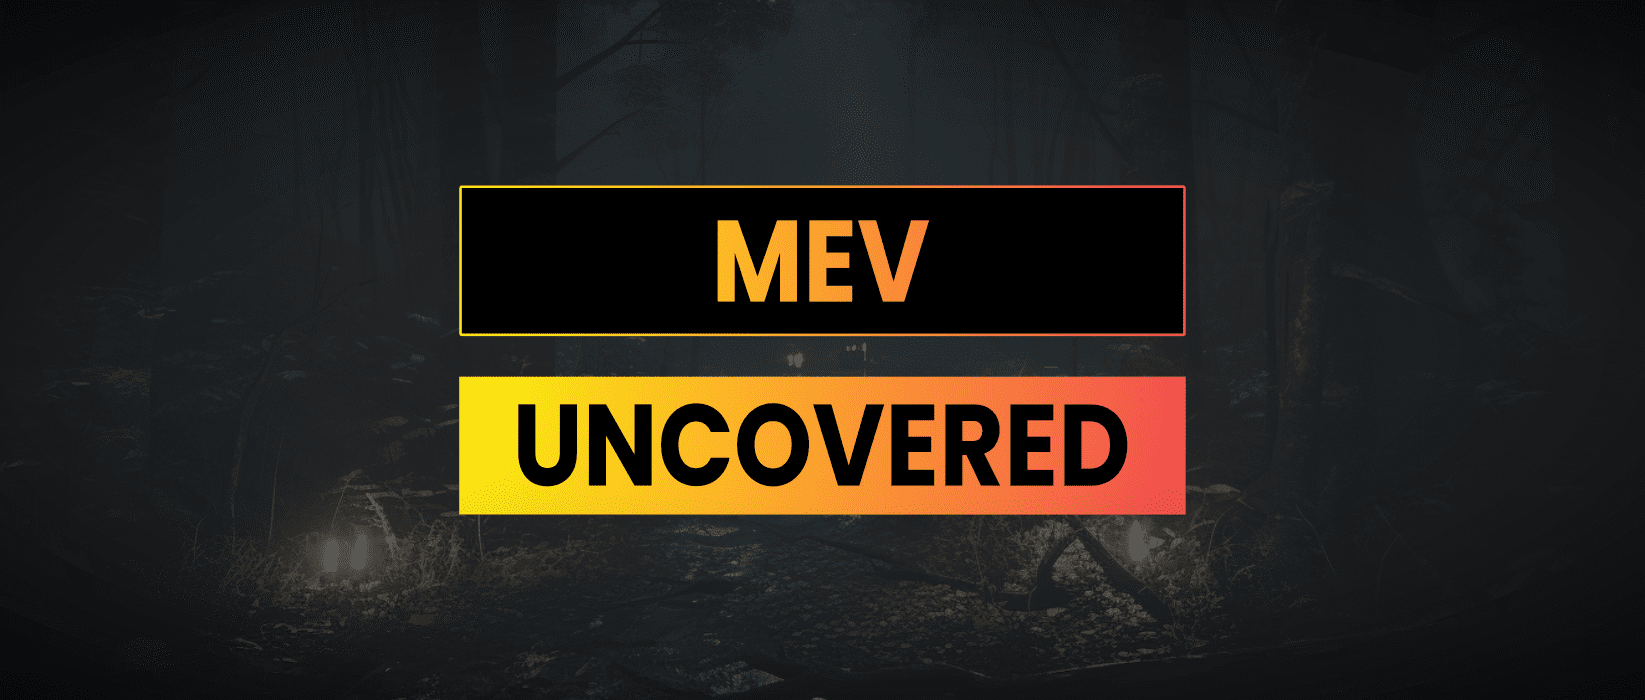 MEV Uncovered | The Dark Side Of DeFi